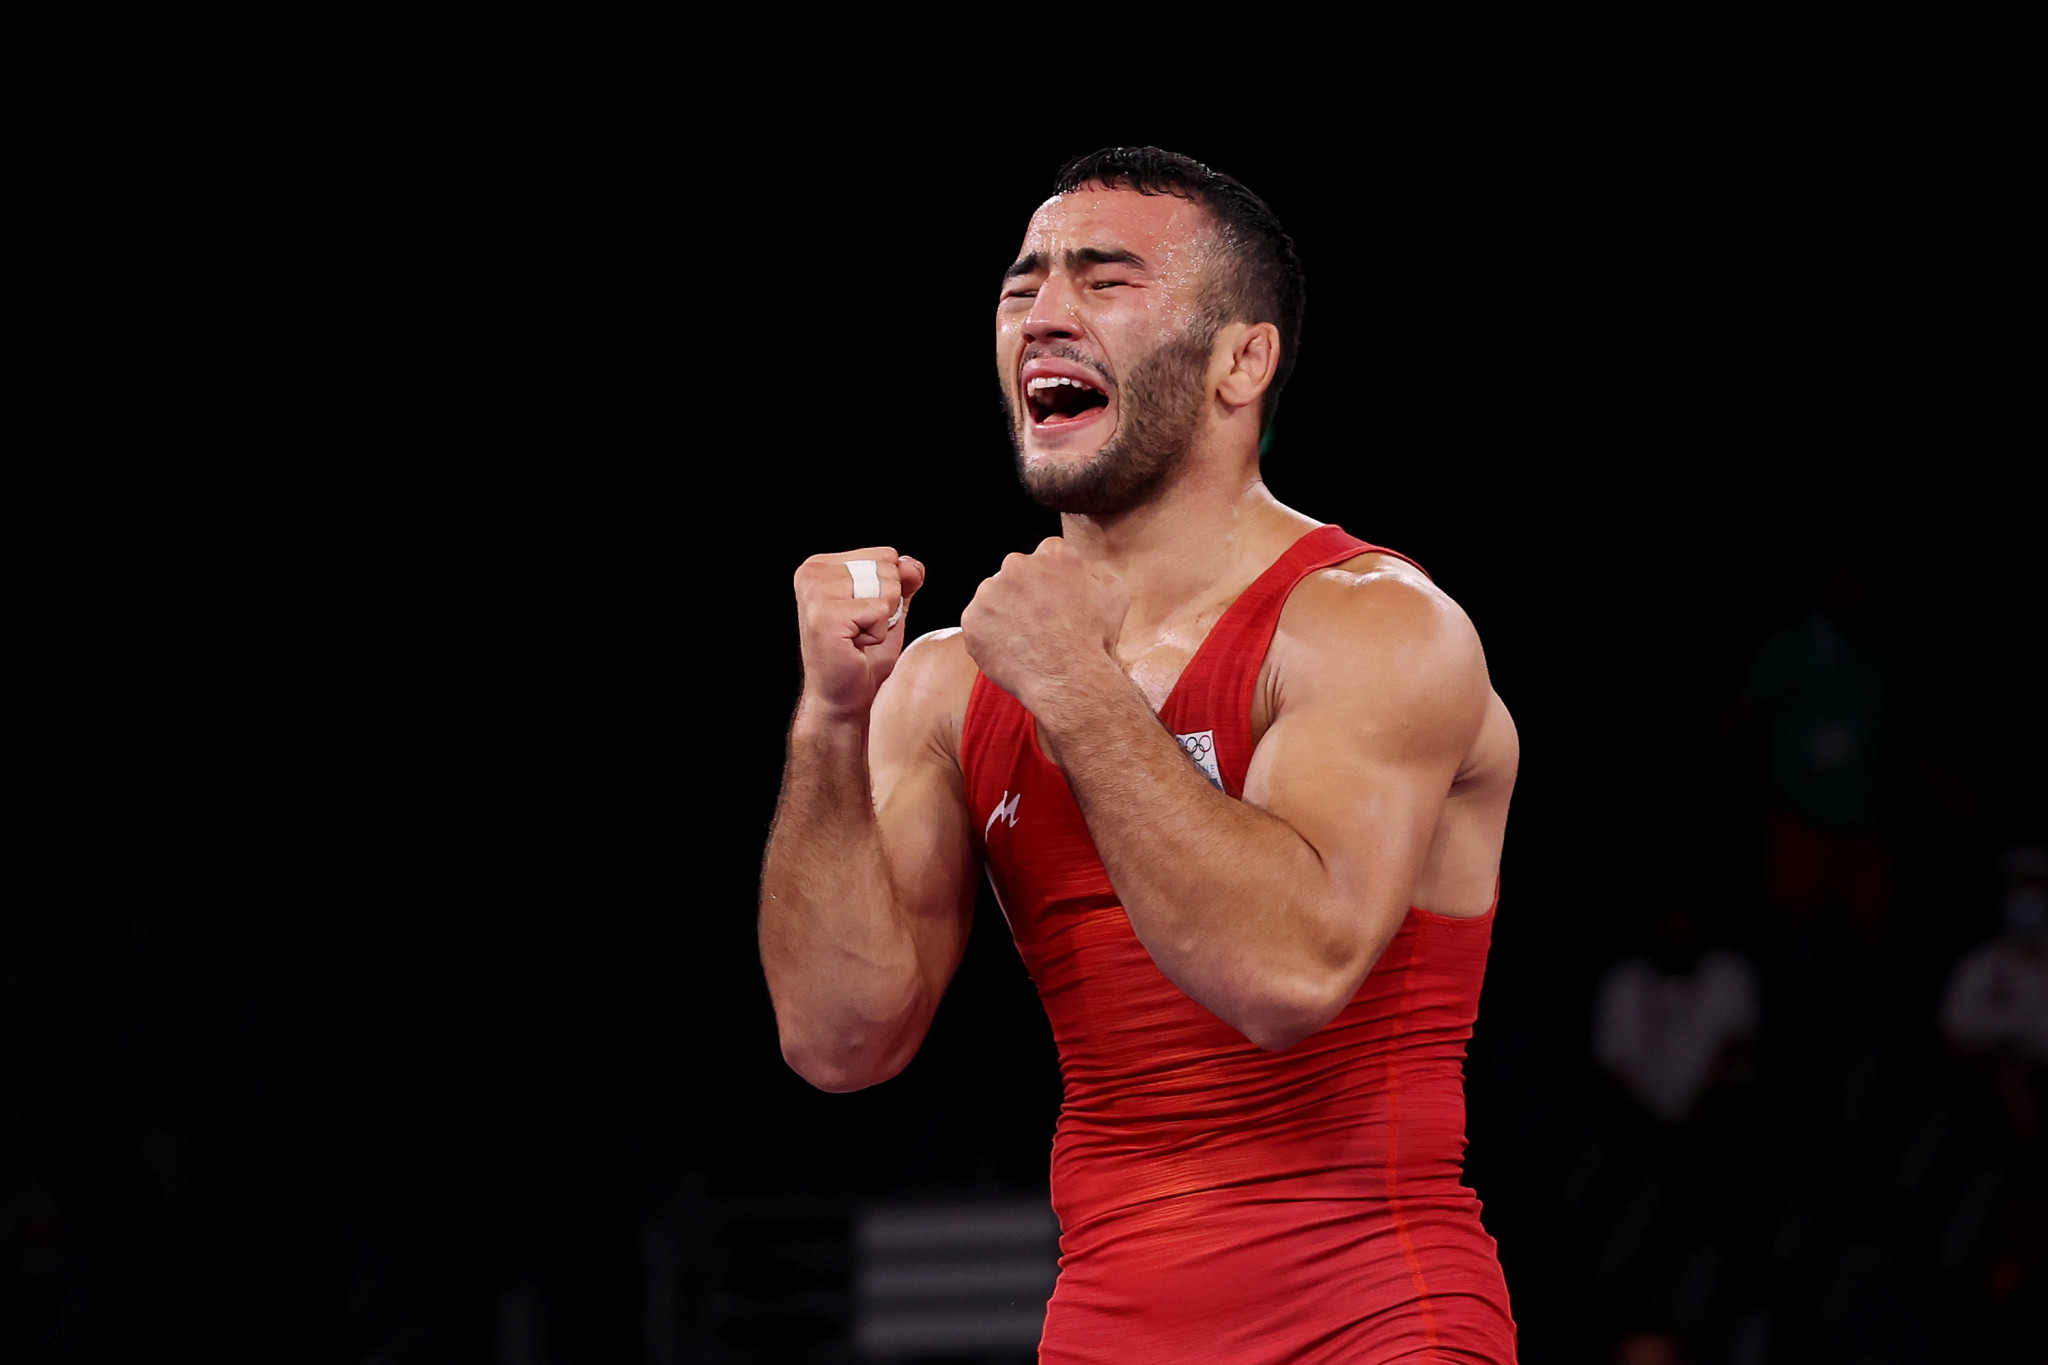 Parviz Nasibov of Ukraine was one of five Greco-Roman wrestling gold medallists today in Samsun ©Getty Images